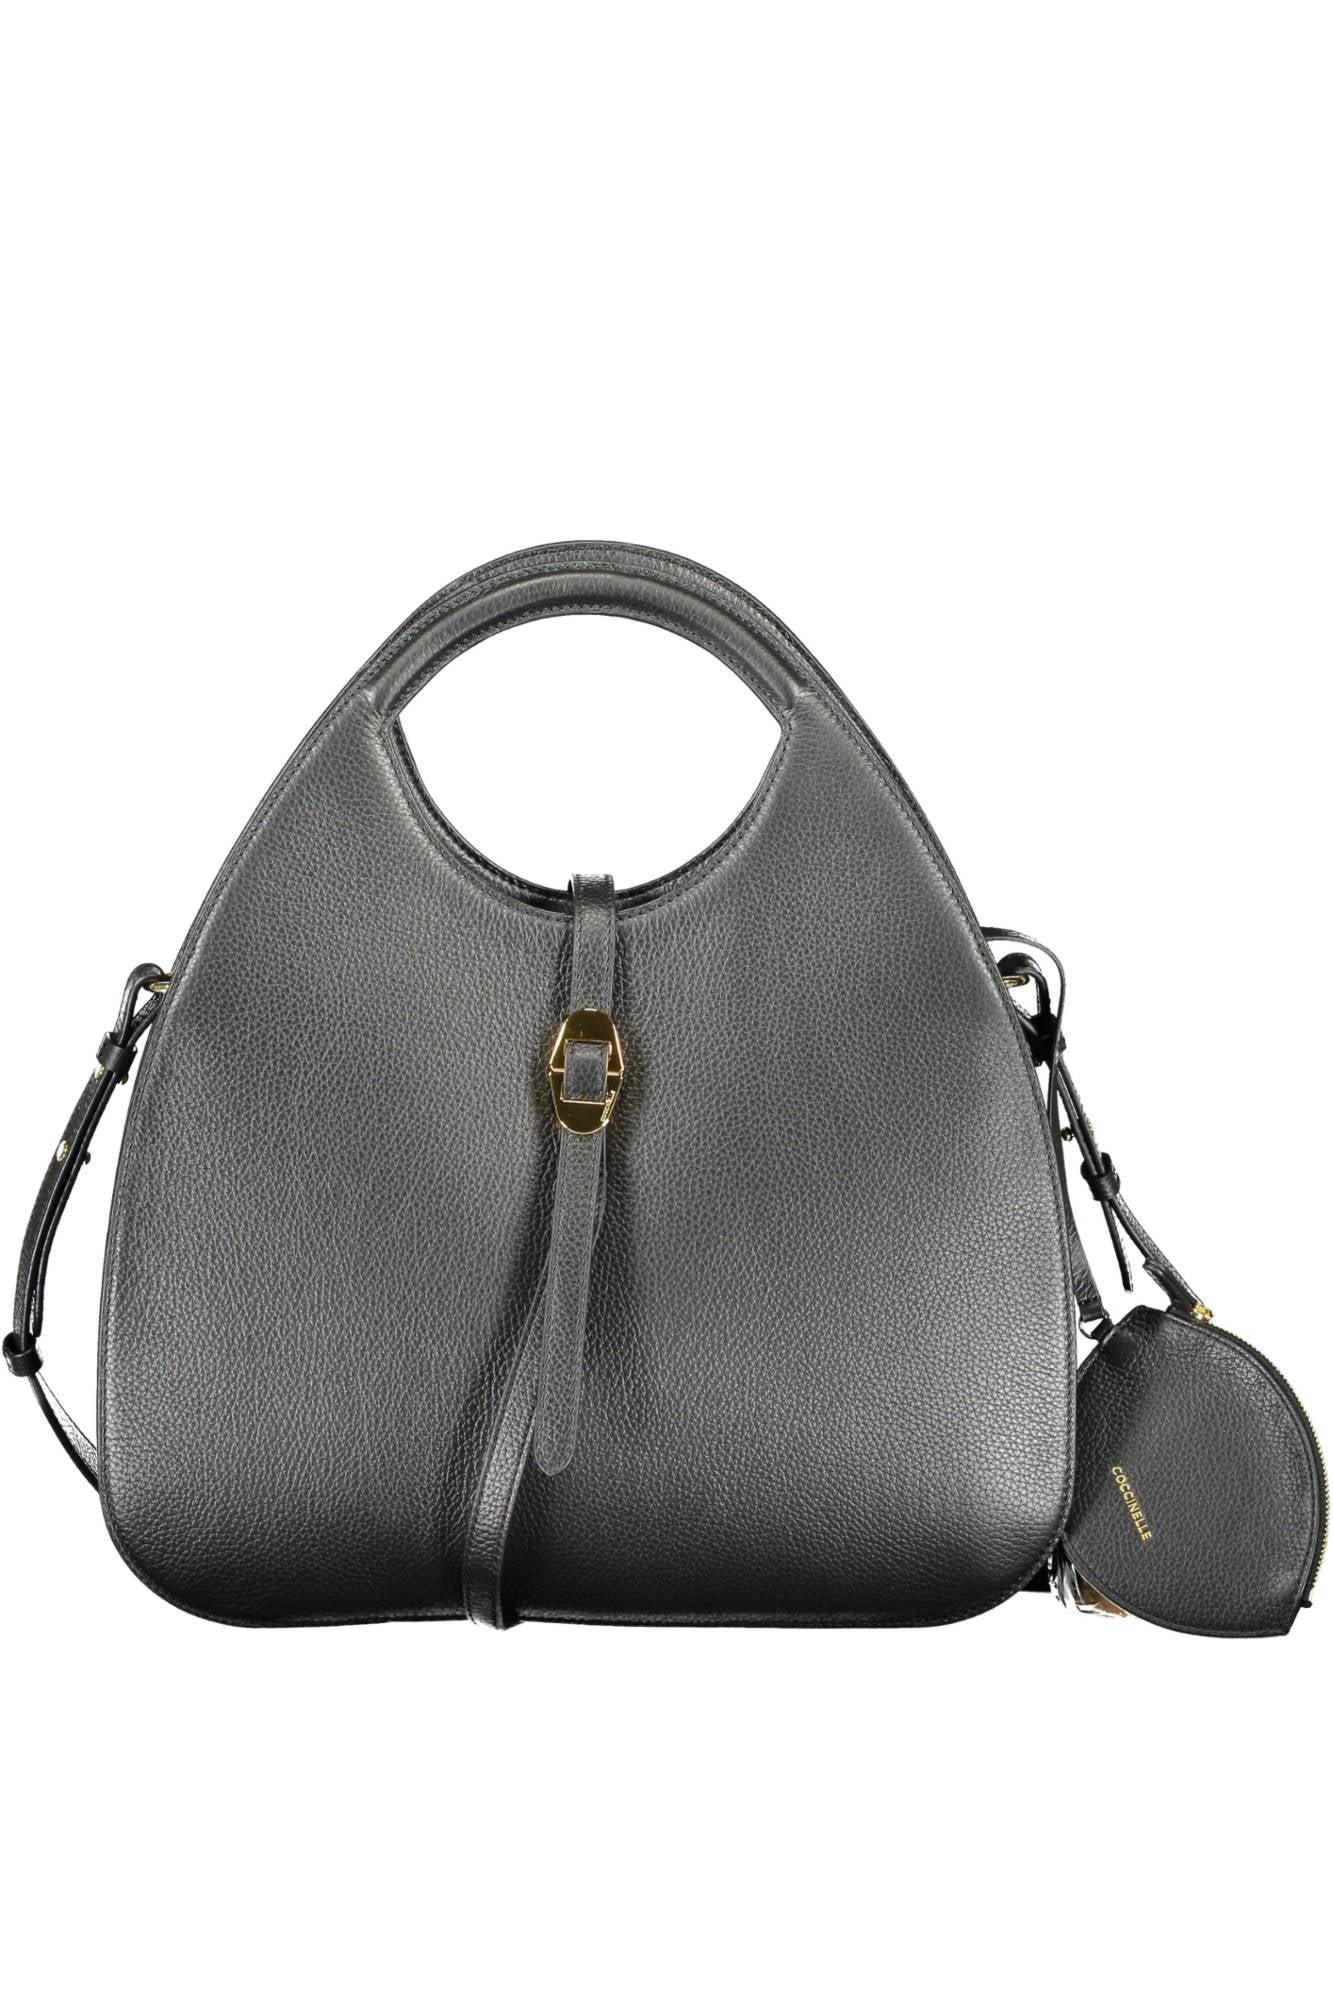 Coccinelle Leather Handbag in Black | Lyst